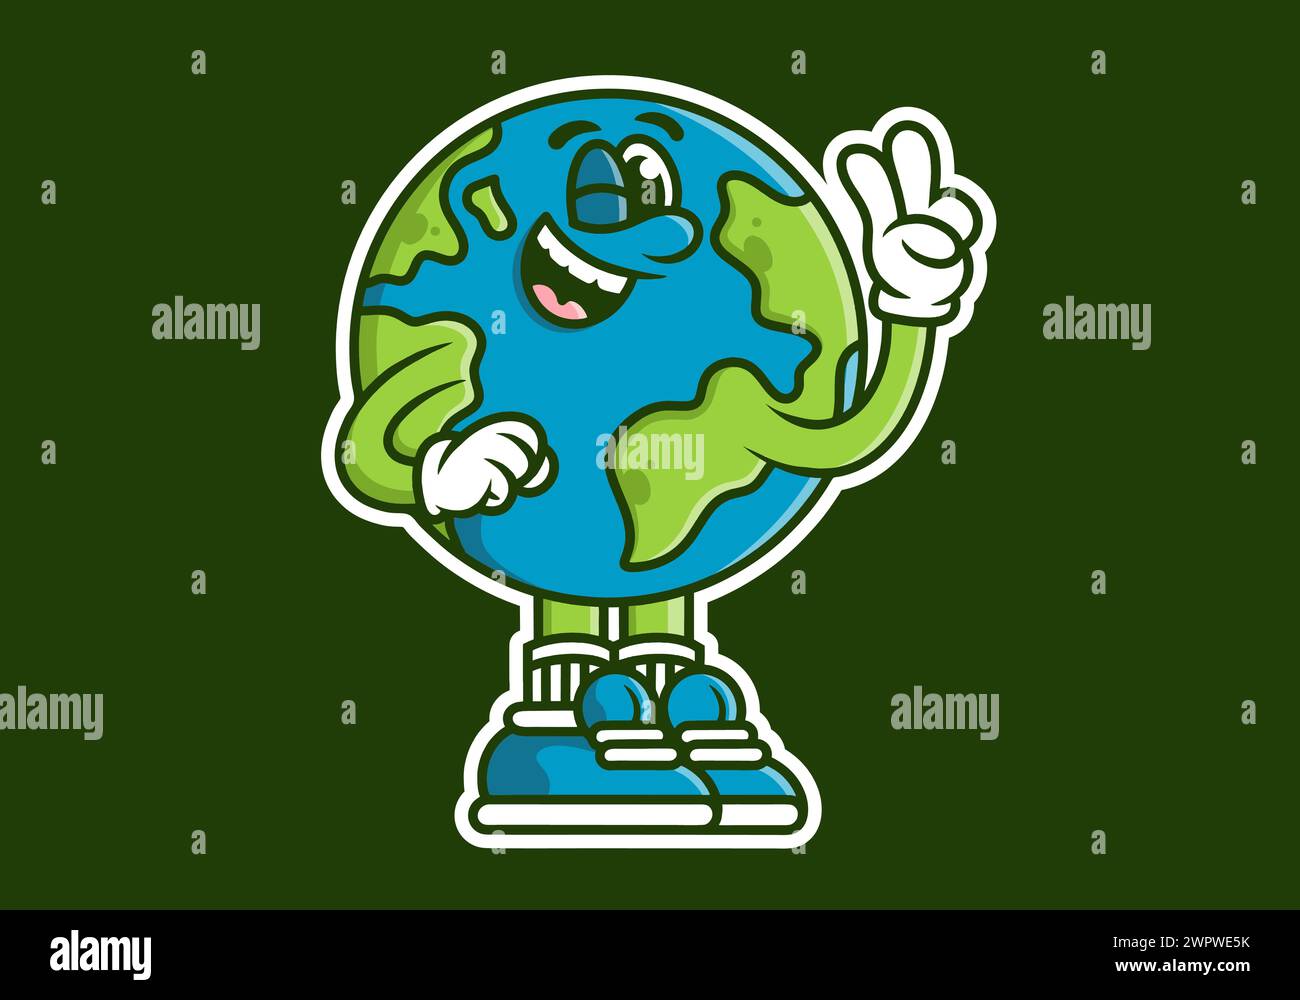 Mascot character illustration of earth with hands forming a symbol of peace. blue green colors Stock Vector